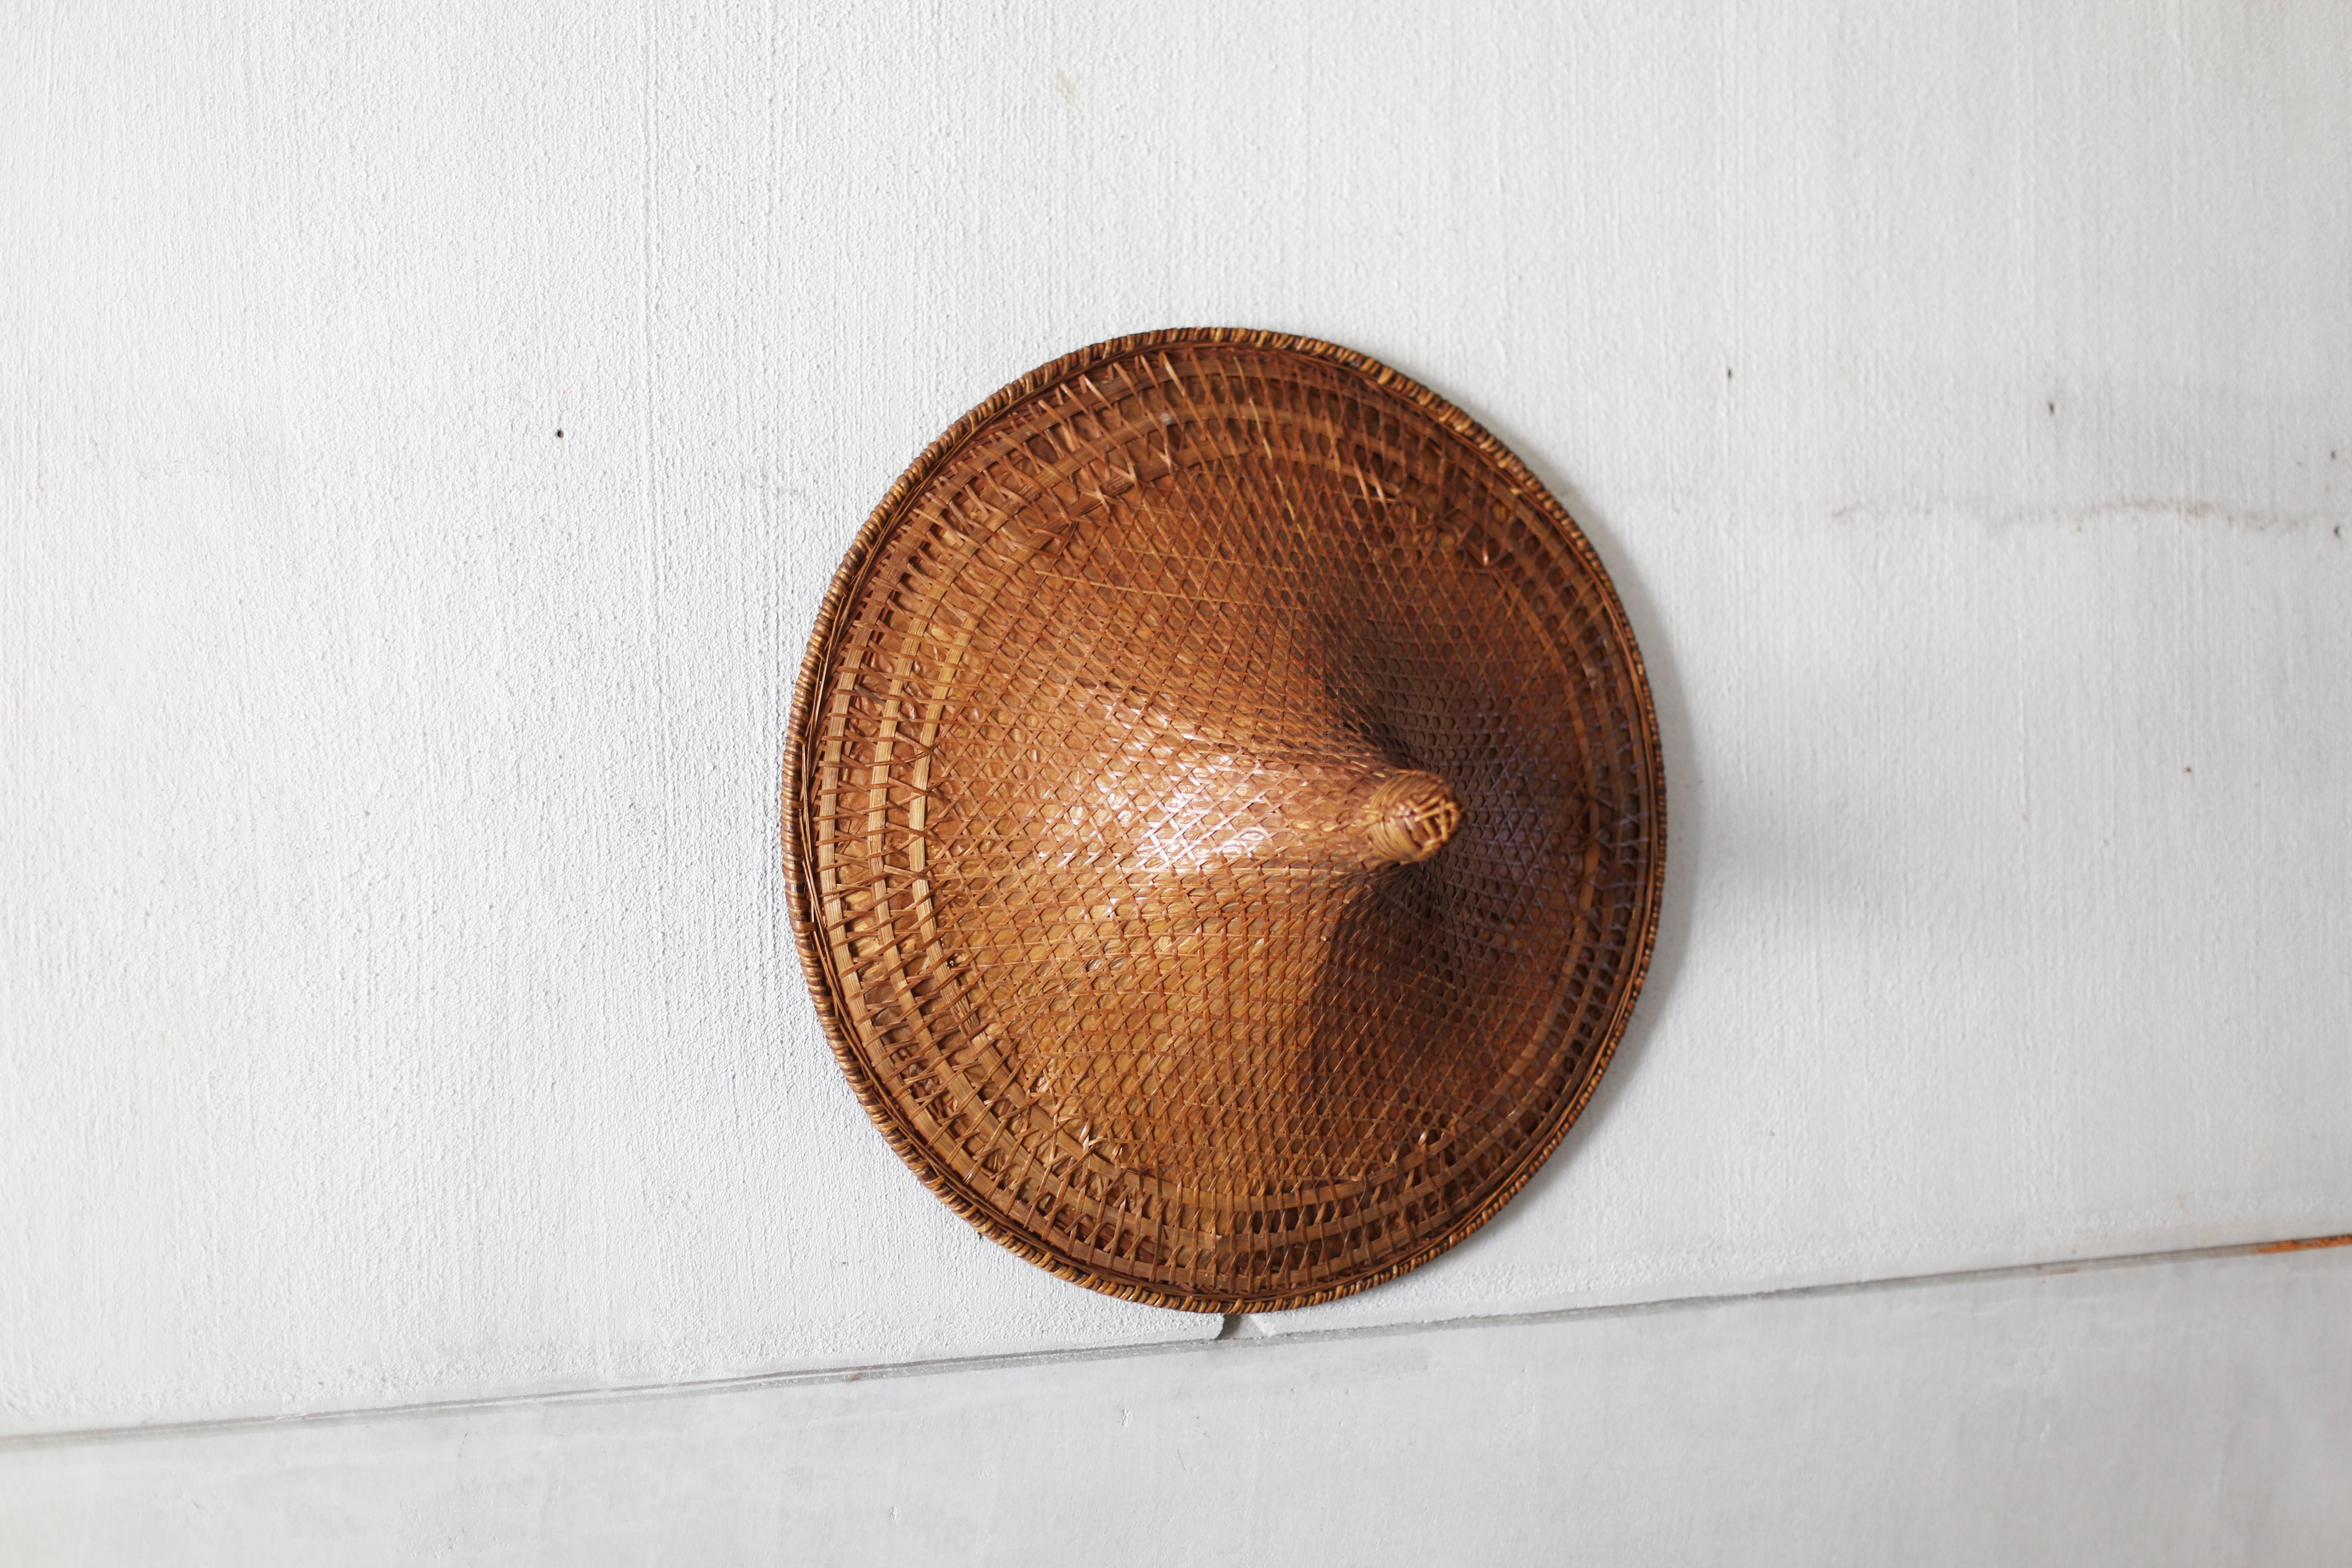 An old hat hand-woven bamboo and straw.
We found this in Japan, but it's not clear where or when it was made.
The texture of the bamboo that has changed over time is amazing.
This would be nice as a display object on the wall.
How about using it as